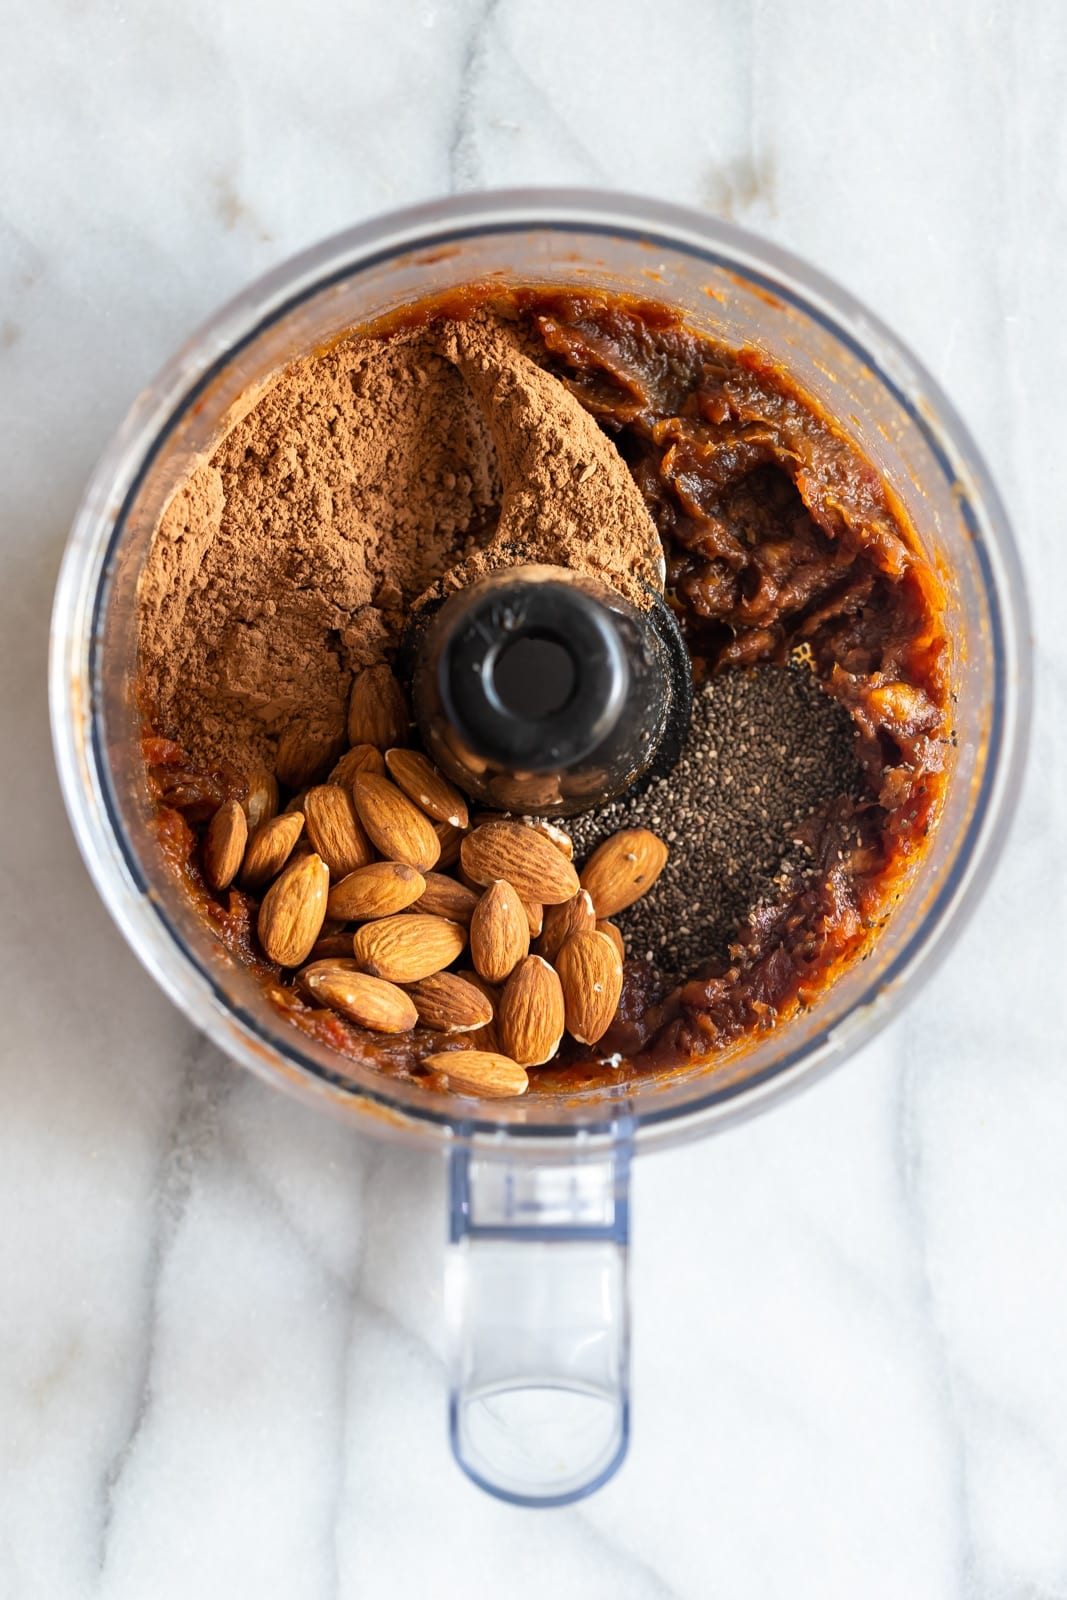 Chocolate energy bite ingredients combined in a food processor